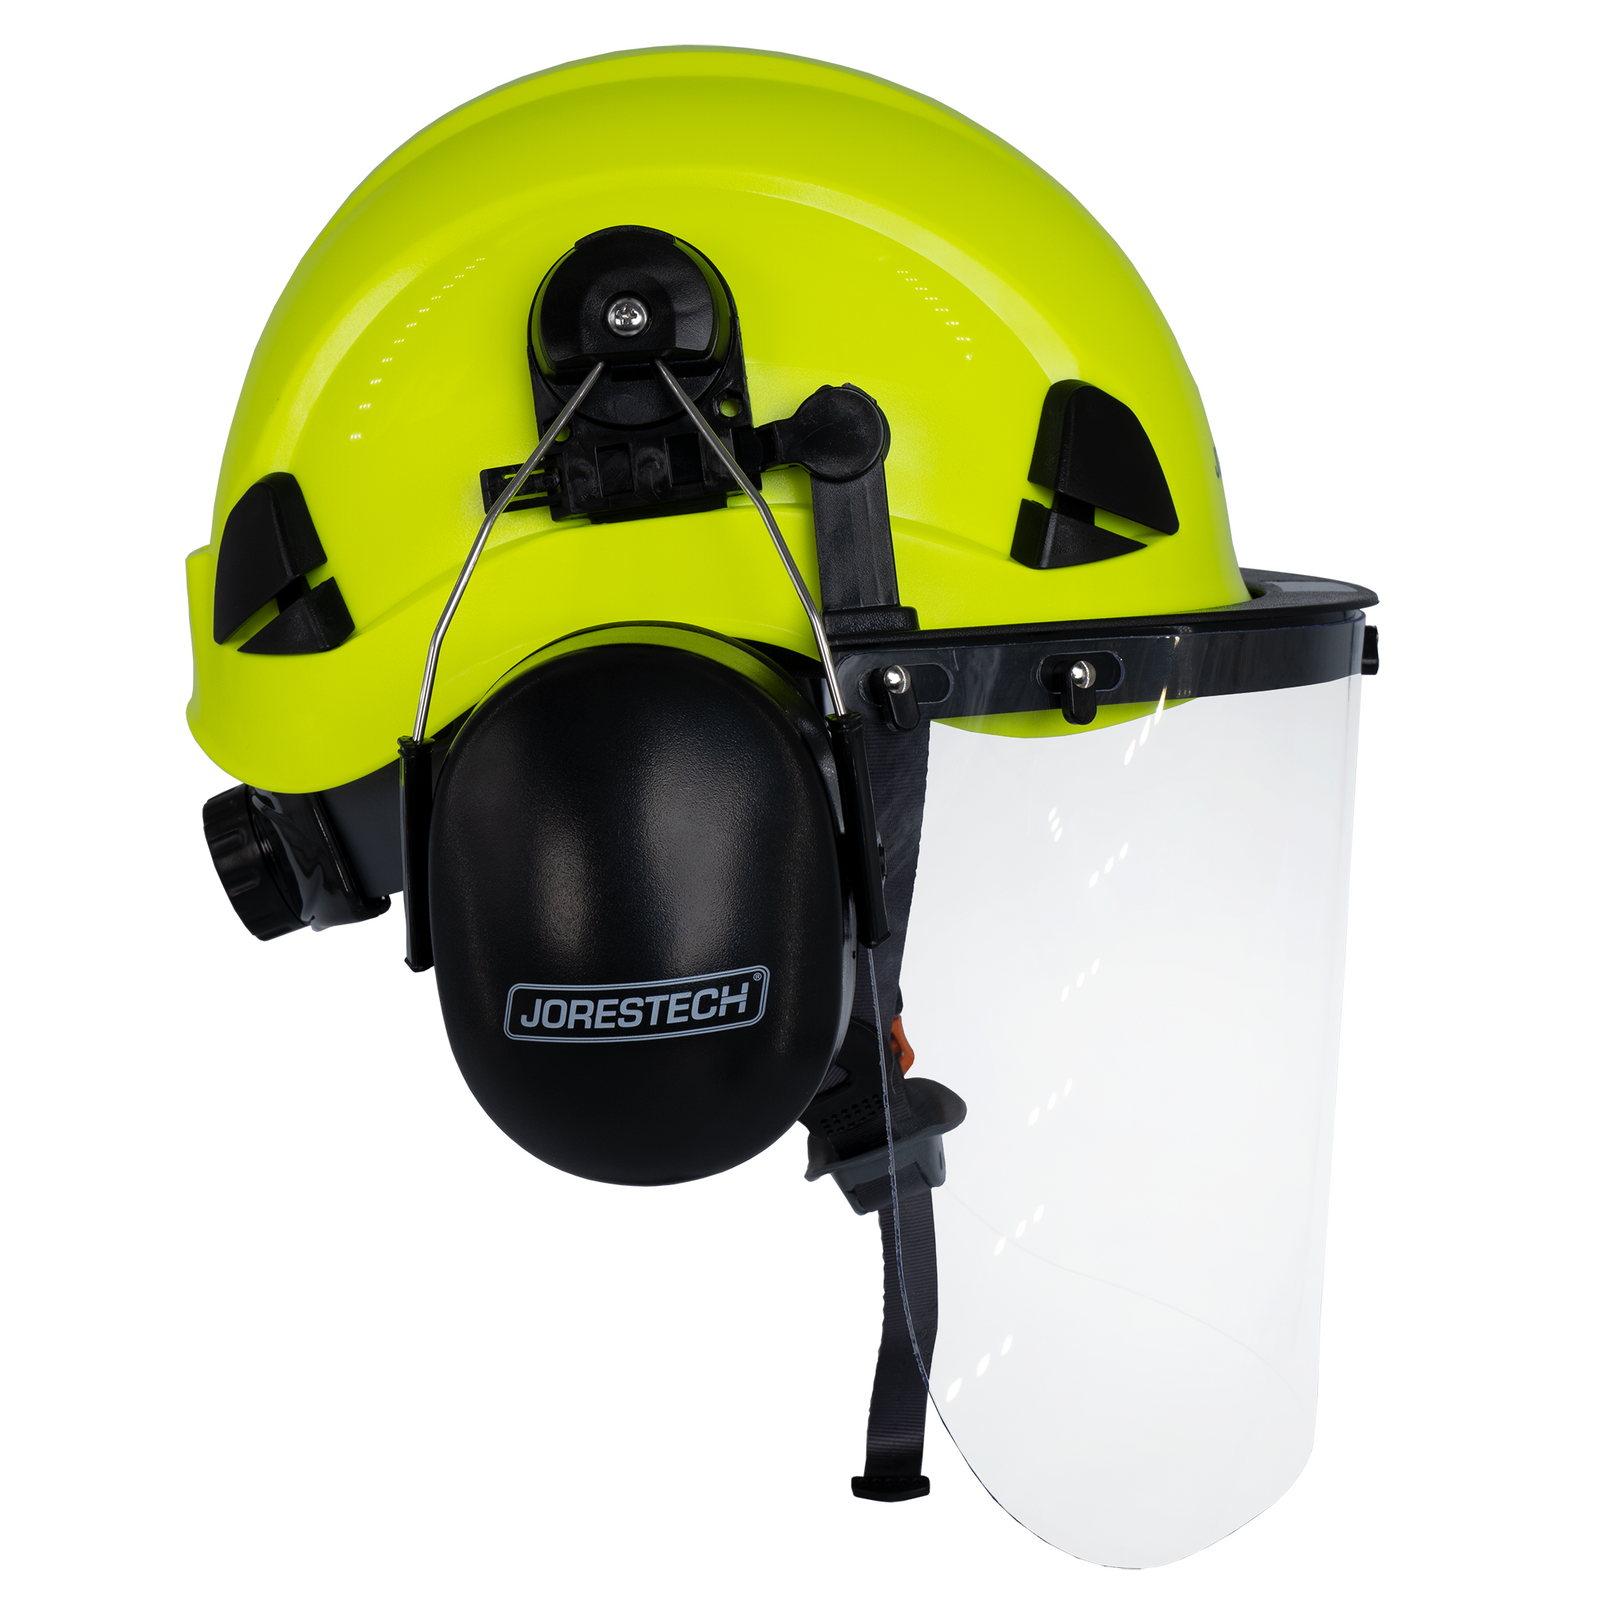 Side view of the Jorestech lime 3-in-1 helmet system with mountable face shield and earmuffs